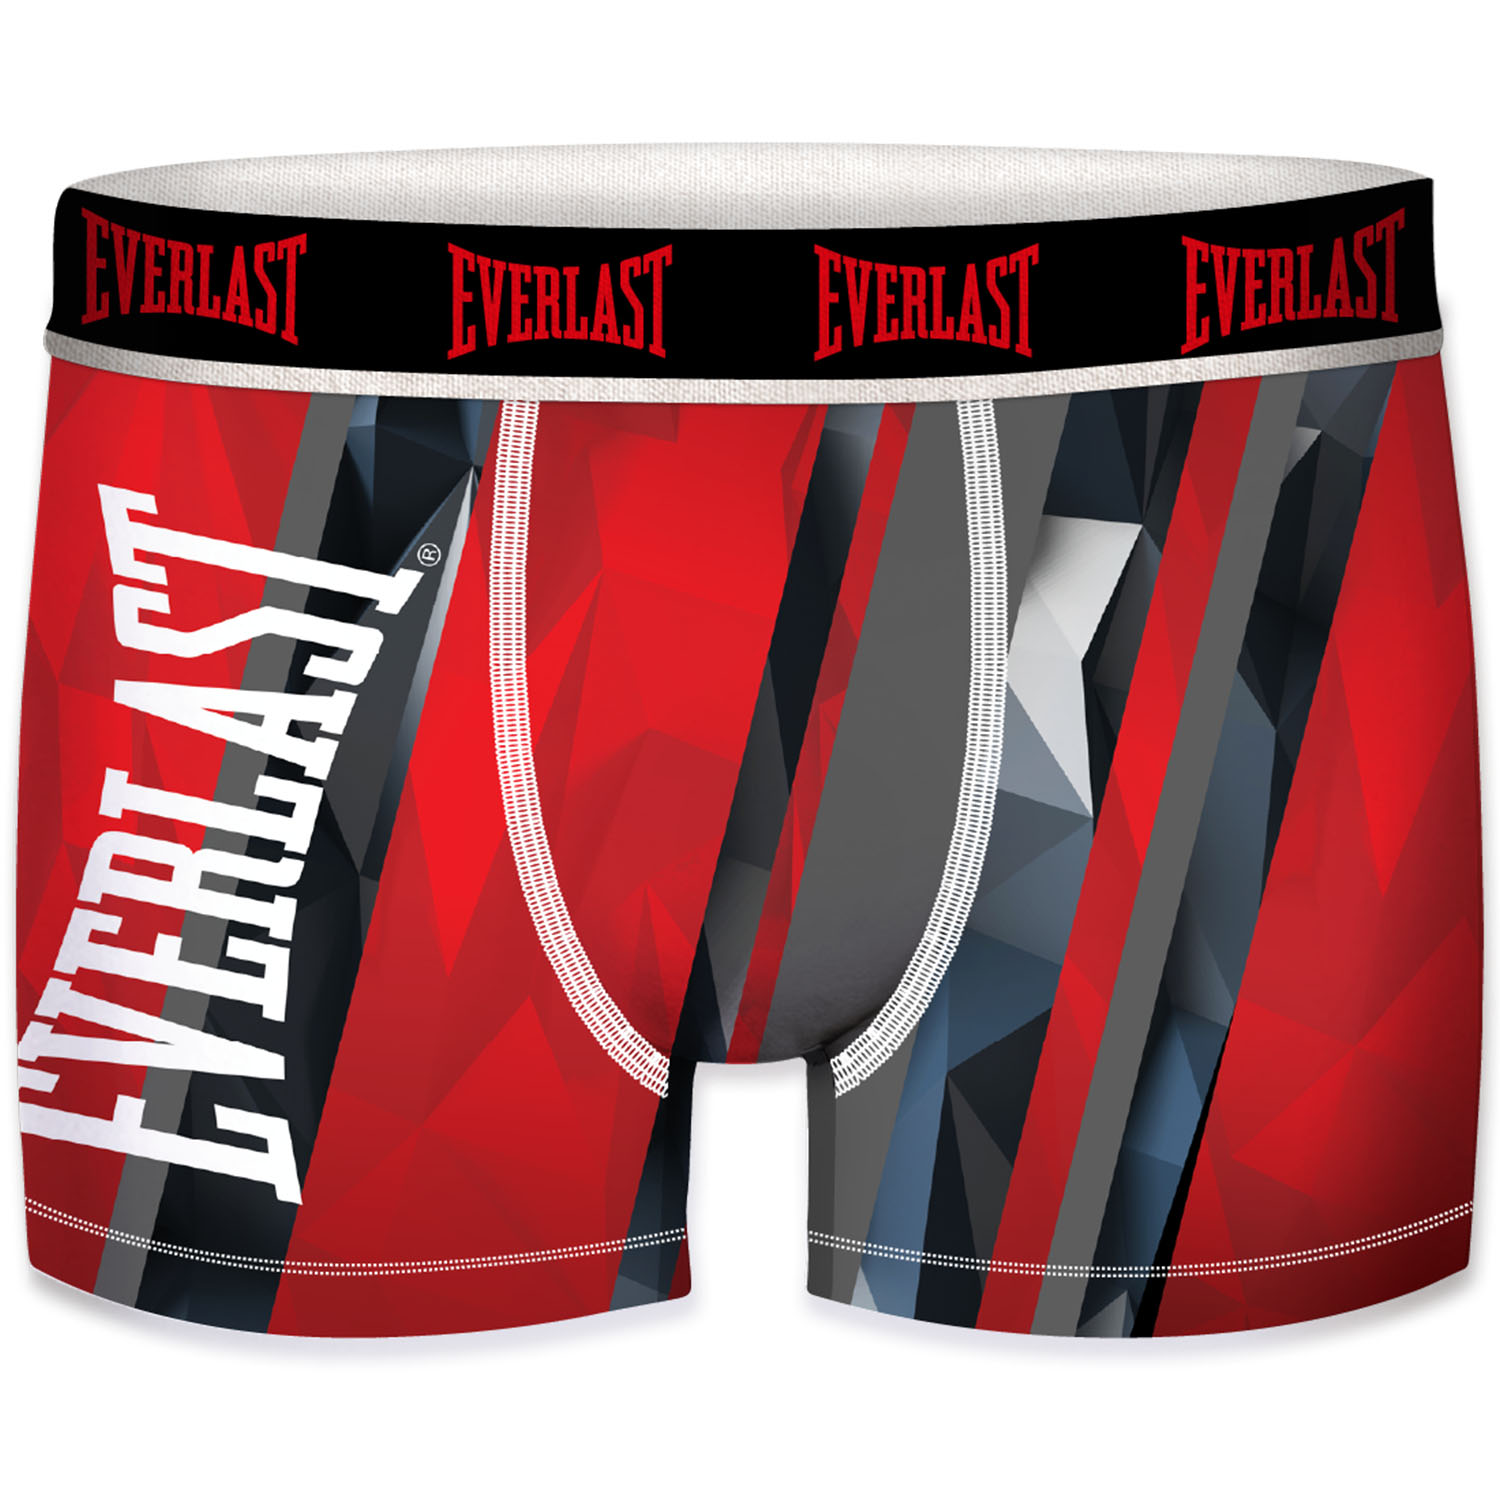 Everlast Boxershorts, Dig2, red, S